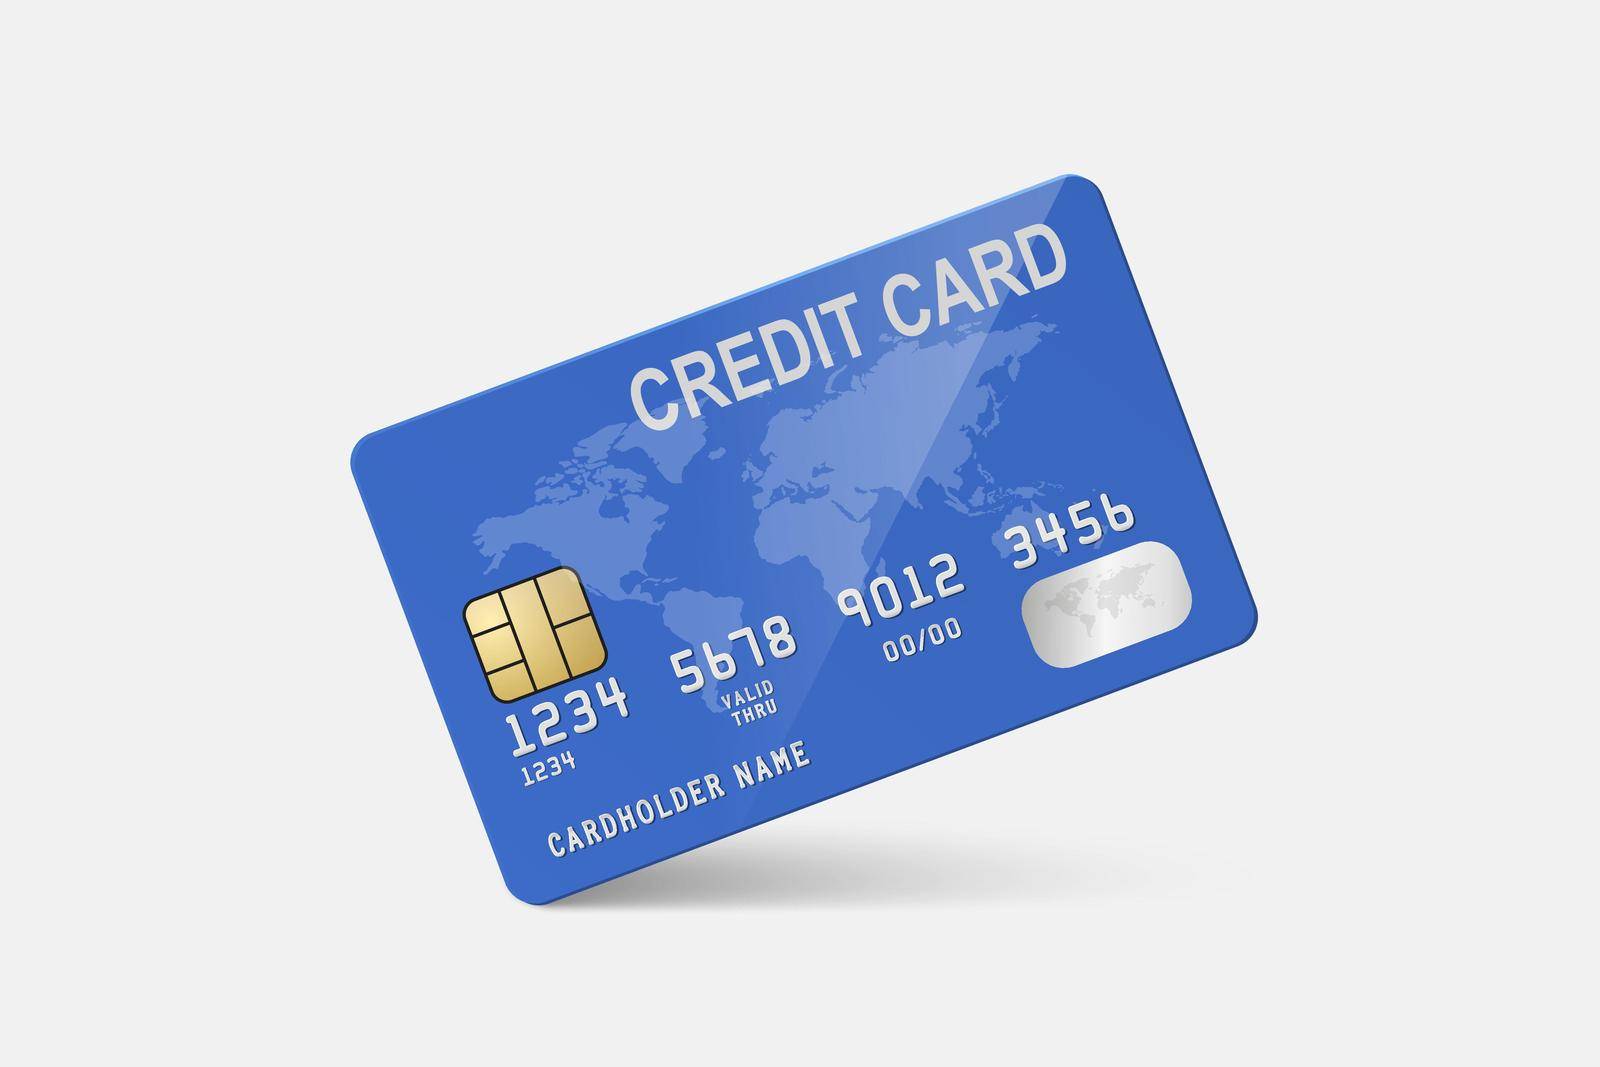 Vector 3d Realistic Blue Credit Card on White Background. Design Template of Plastic Credit or Debit Card. Credit Card Payment Concept. Front View.